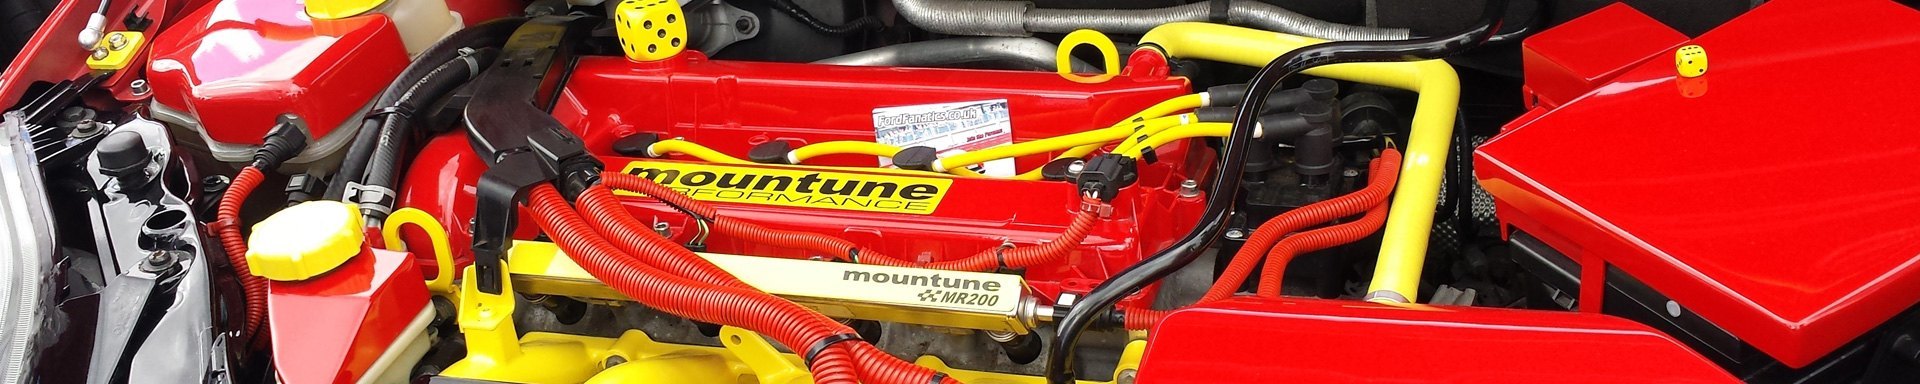 Mountune Turbo & Superchargers